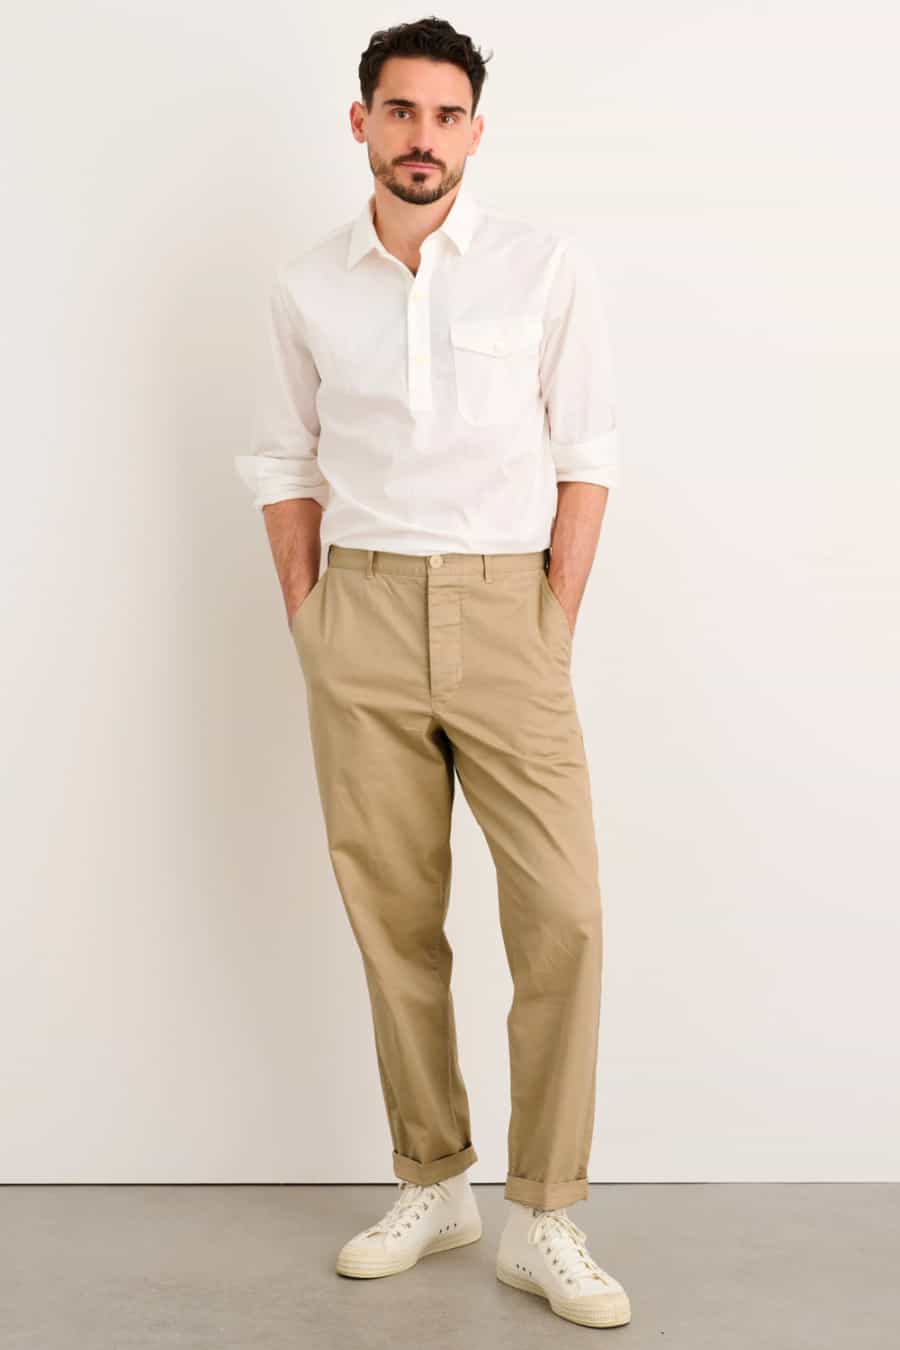 Men's khaki worker pants, tucked in white shirt, white sneakers outfit